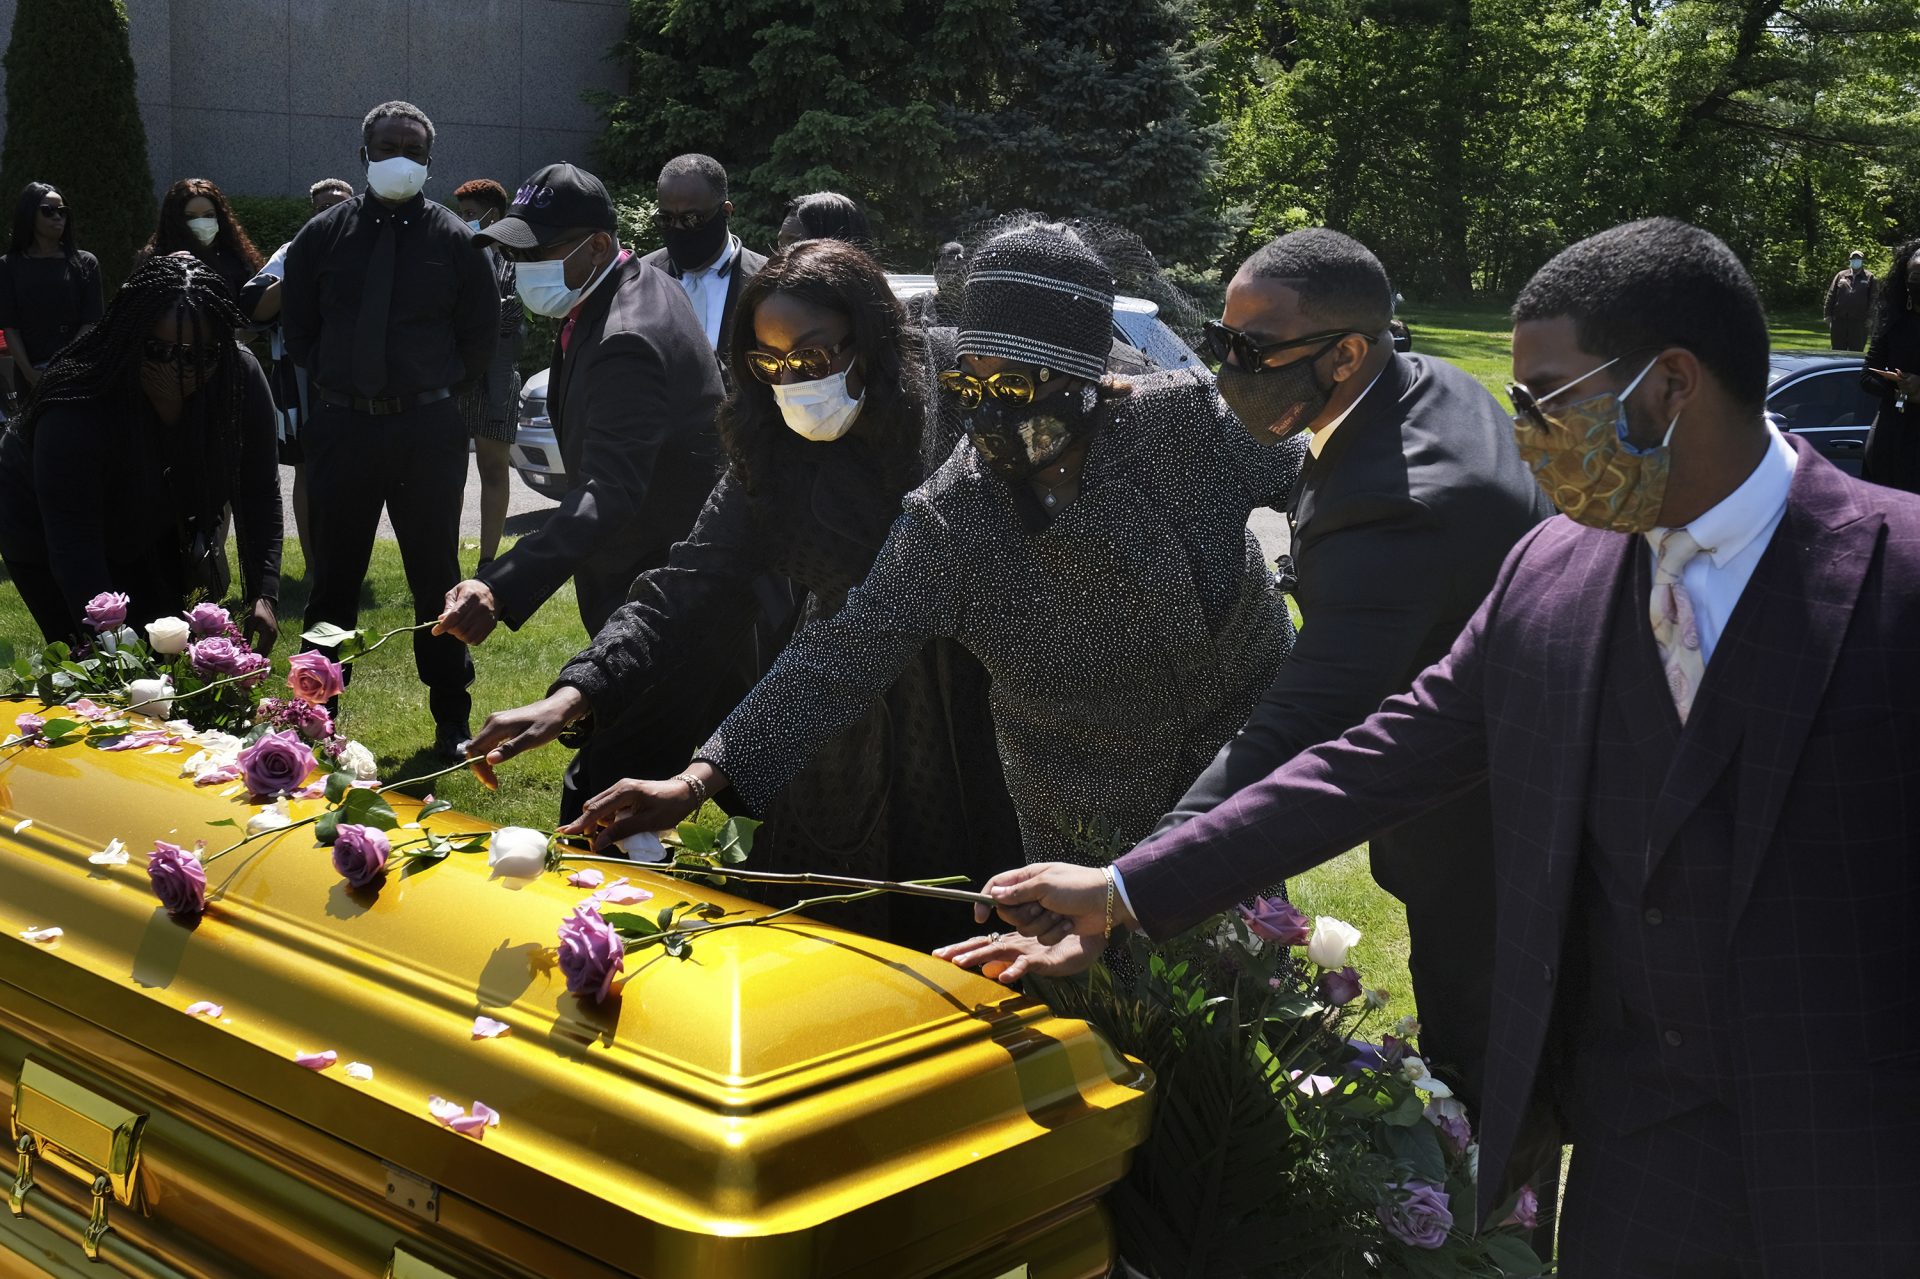 Family and friends lay flowers on the casket of Bishop Carl Williams Jr. last week at Hollywood Memorial Park and Cemetery in Union, N.J. Only a few family members were permitted to attend the service in person due to the pandemic.